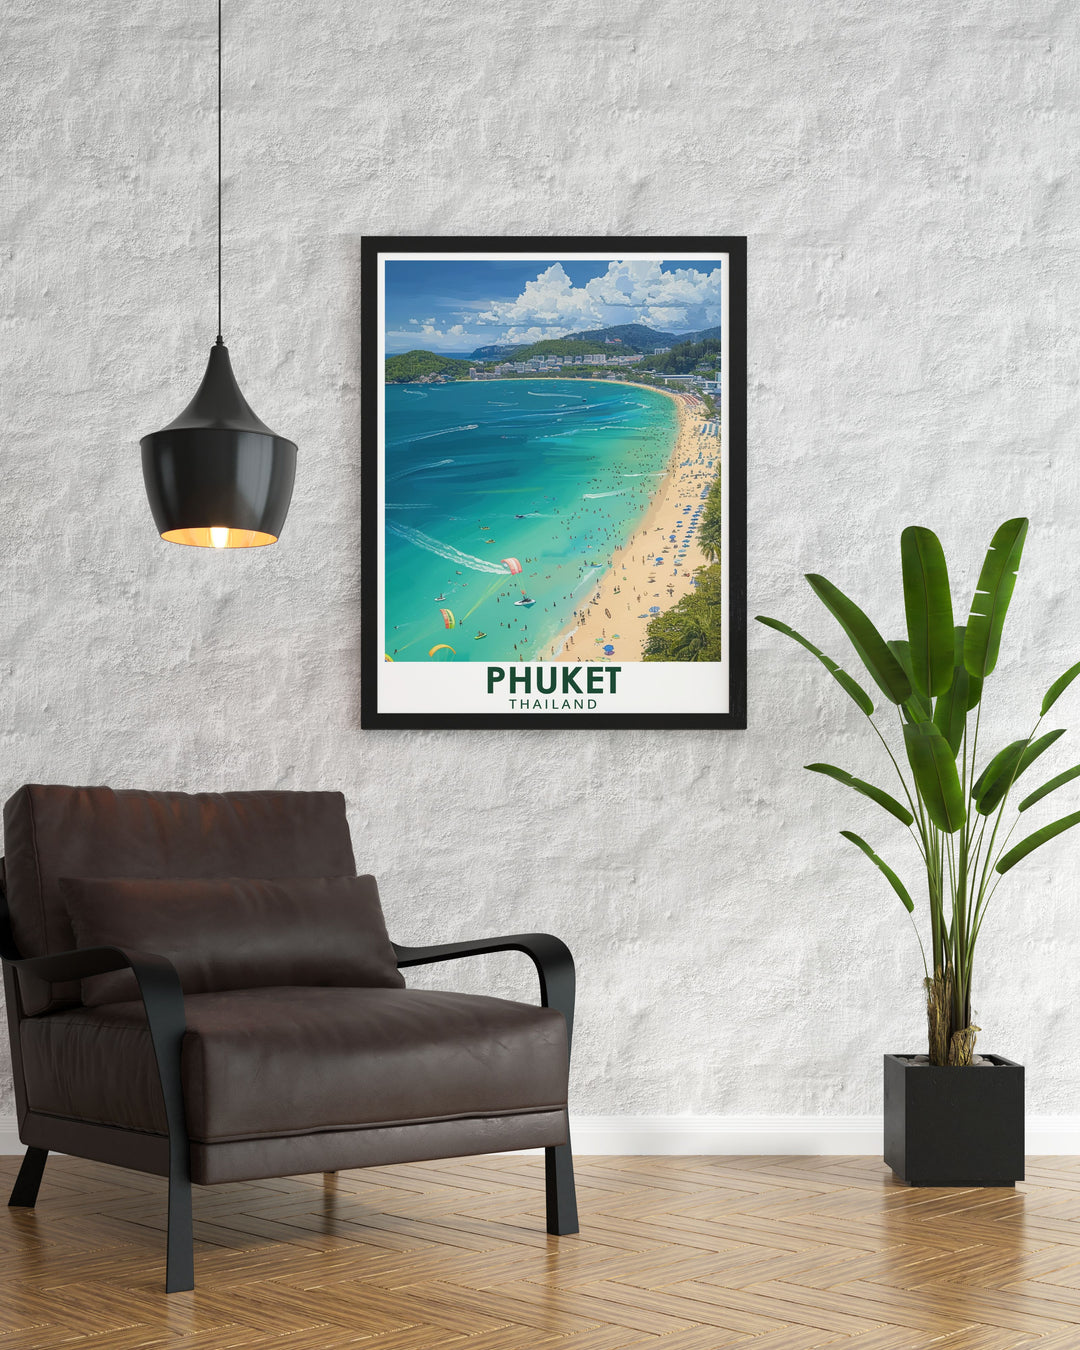 Patong Beach travel poster featuring detailed illustrations of the famous Thai coastline perfect for those who want to relive their travels or dream of visiting Patong Beach a great addition to any wall art collection